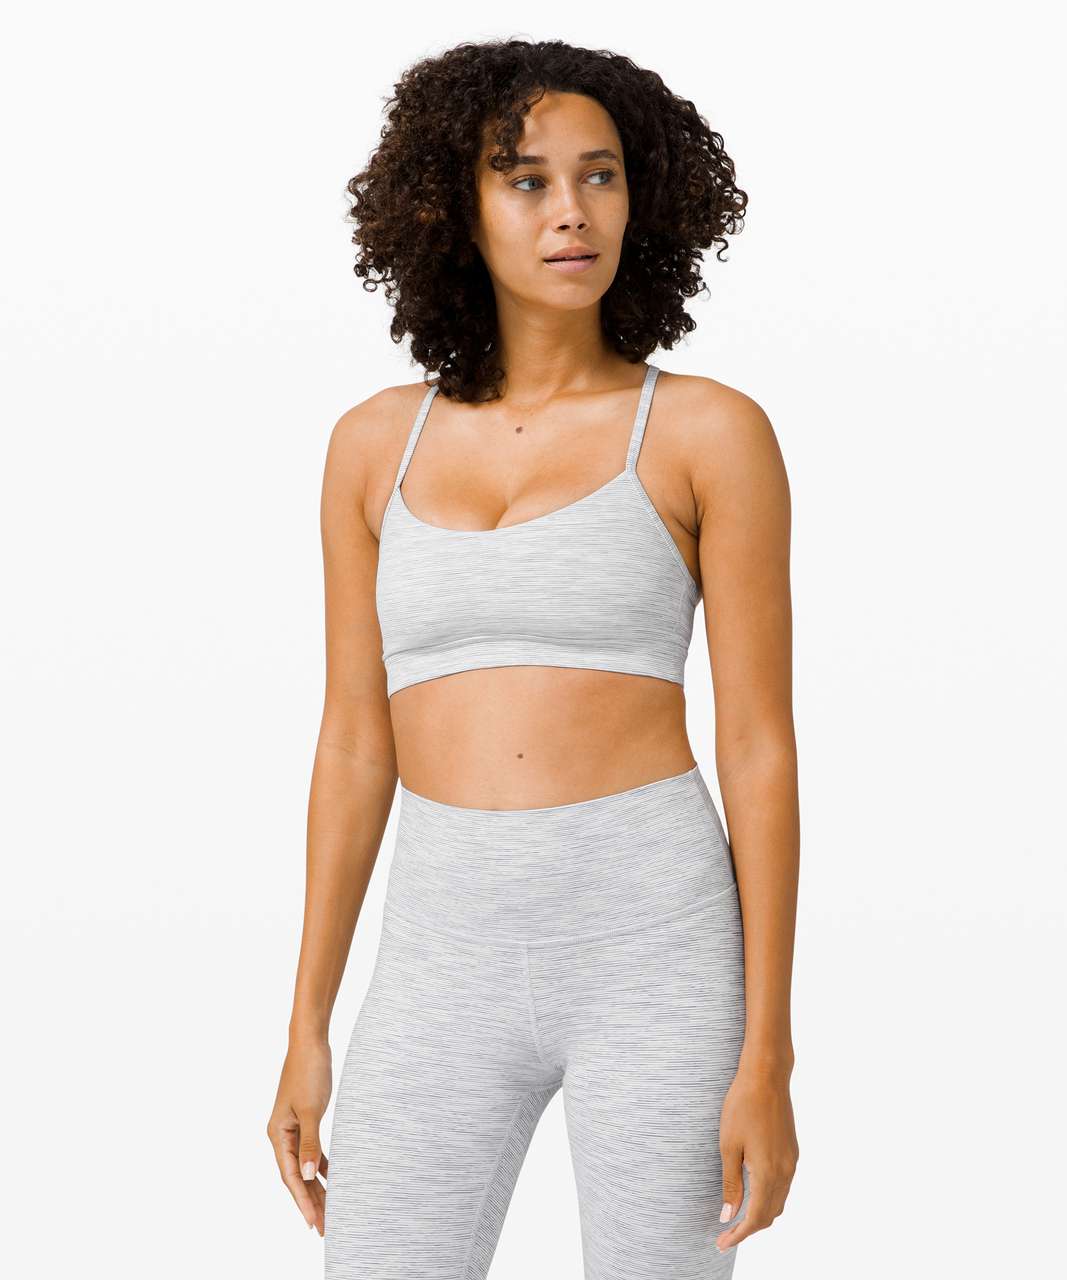 Lululemon Flow Y Bra Nulu *Light Support, B/C Cup - Wee Are From Space Nimbus Battleship